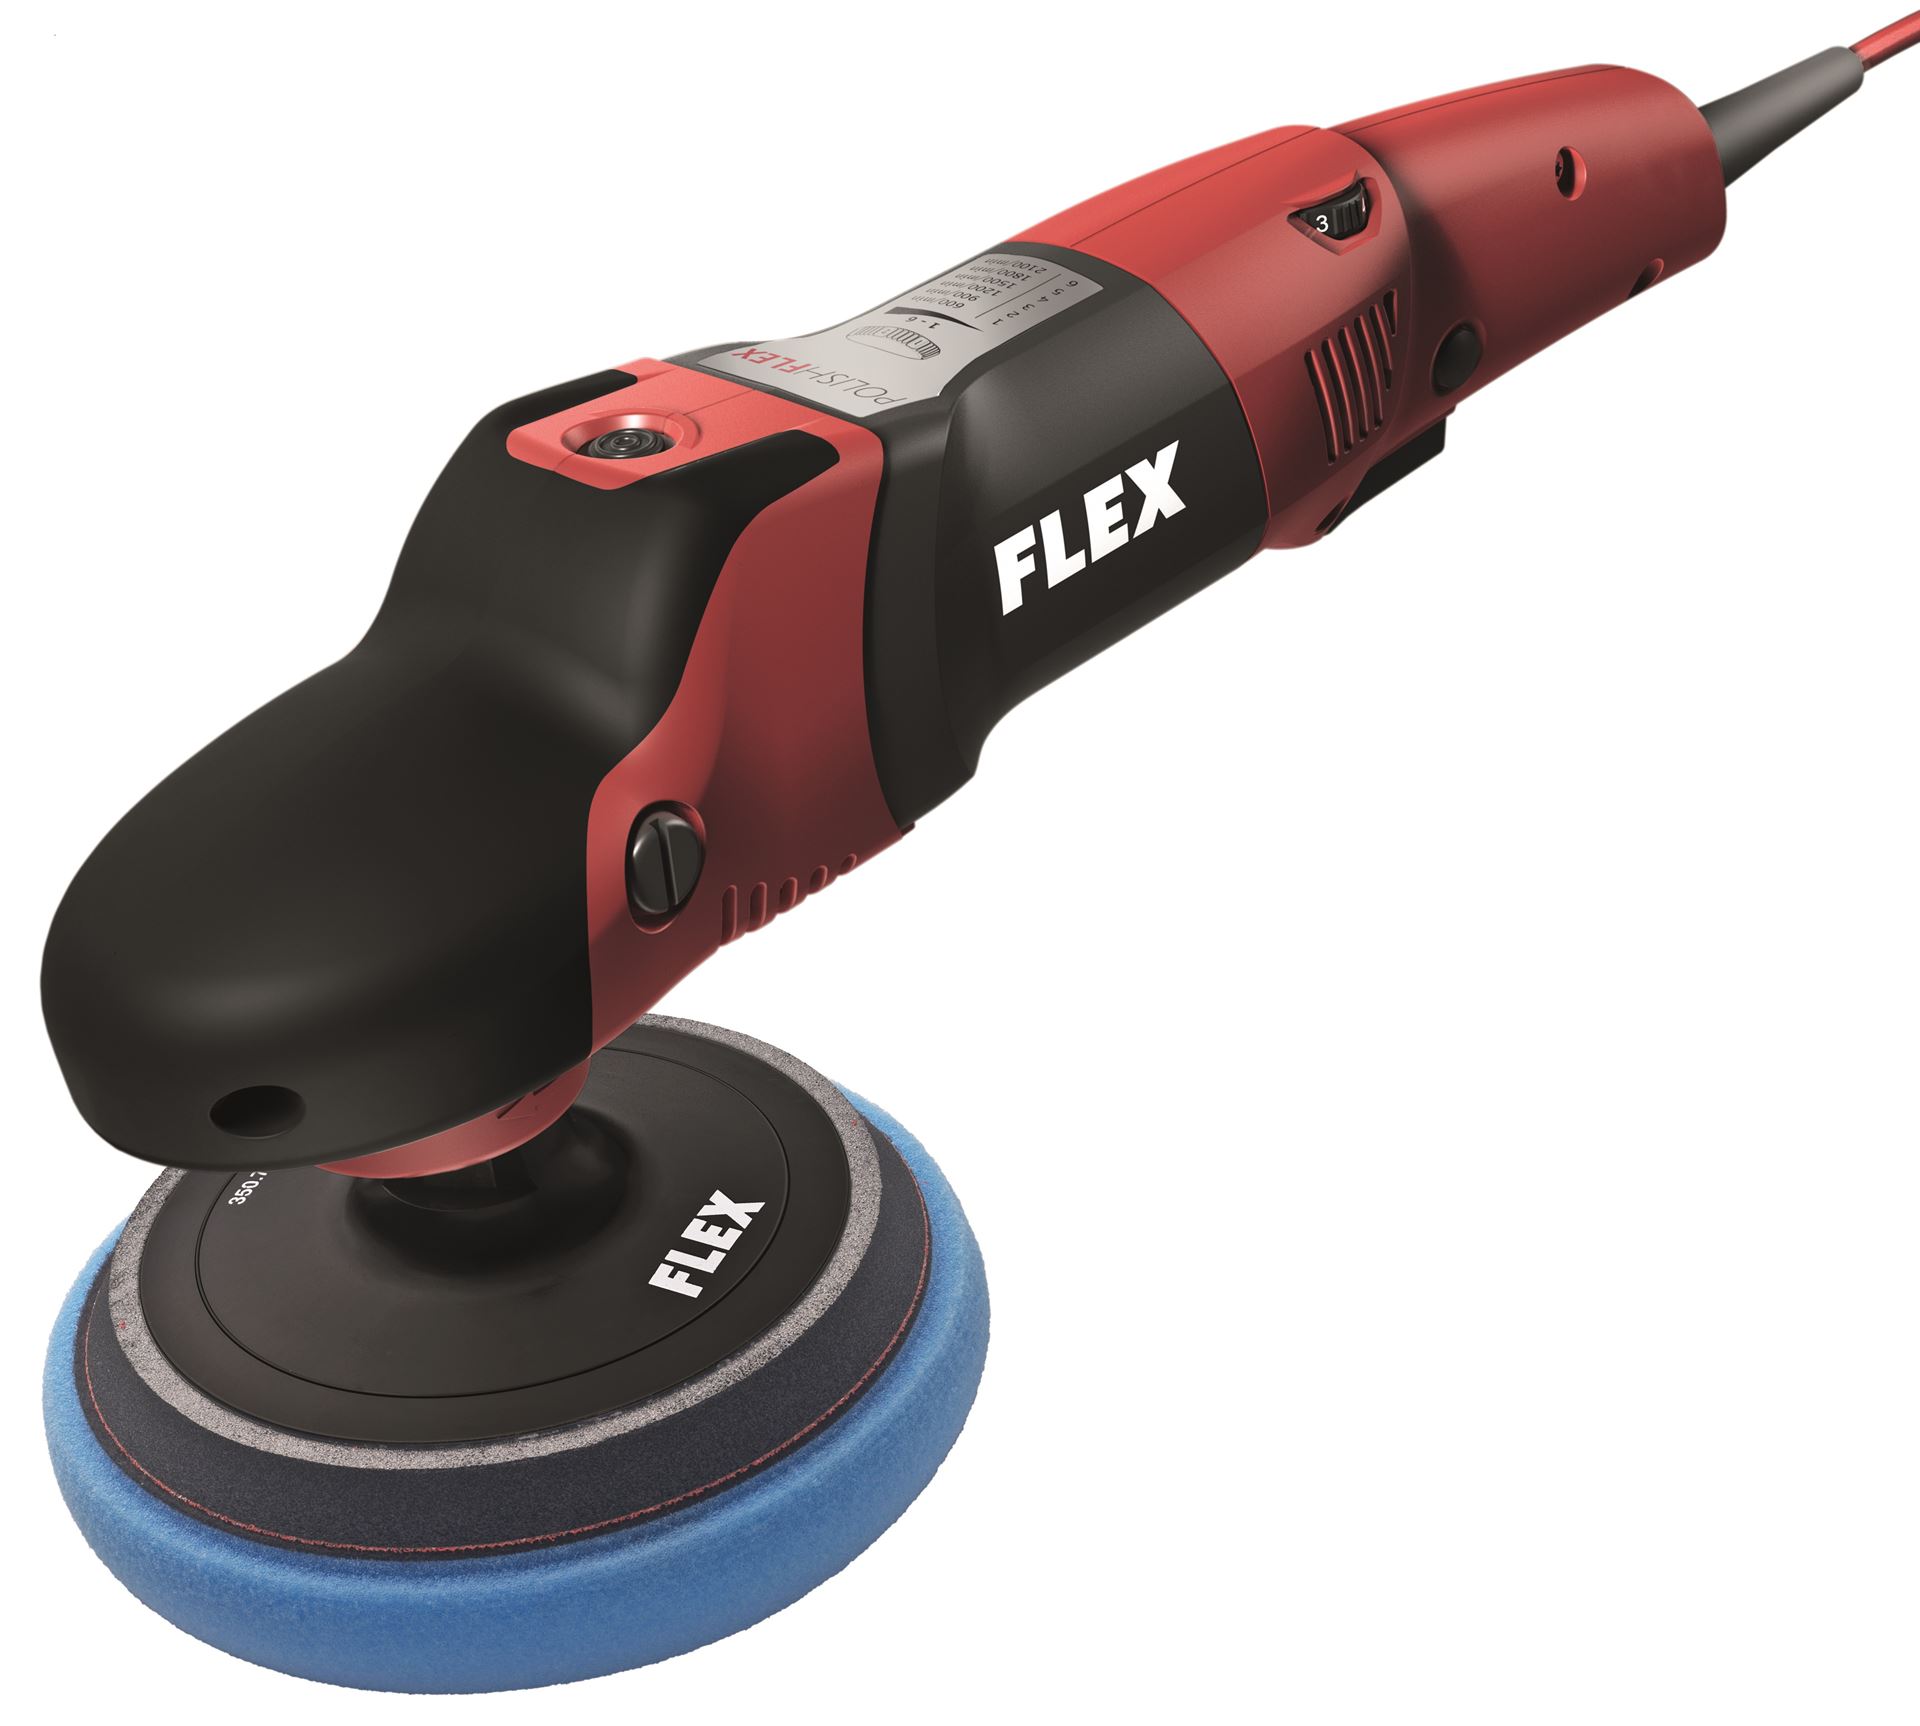 10 Amp, 7 in. Variable-Speed Rotary Polisher/Sander